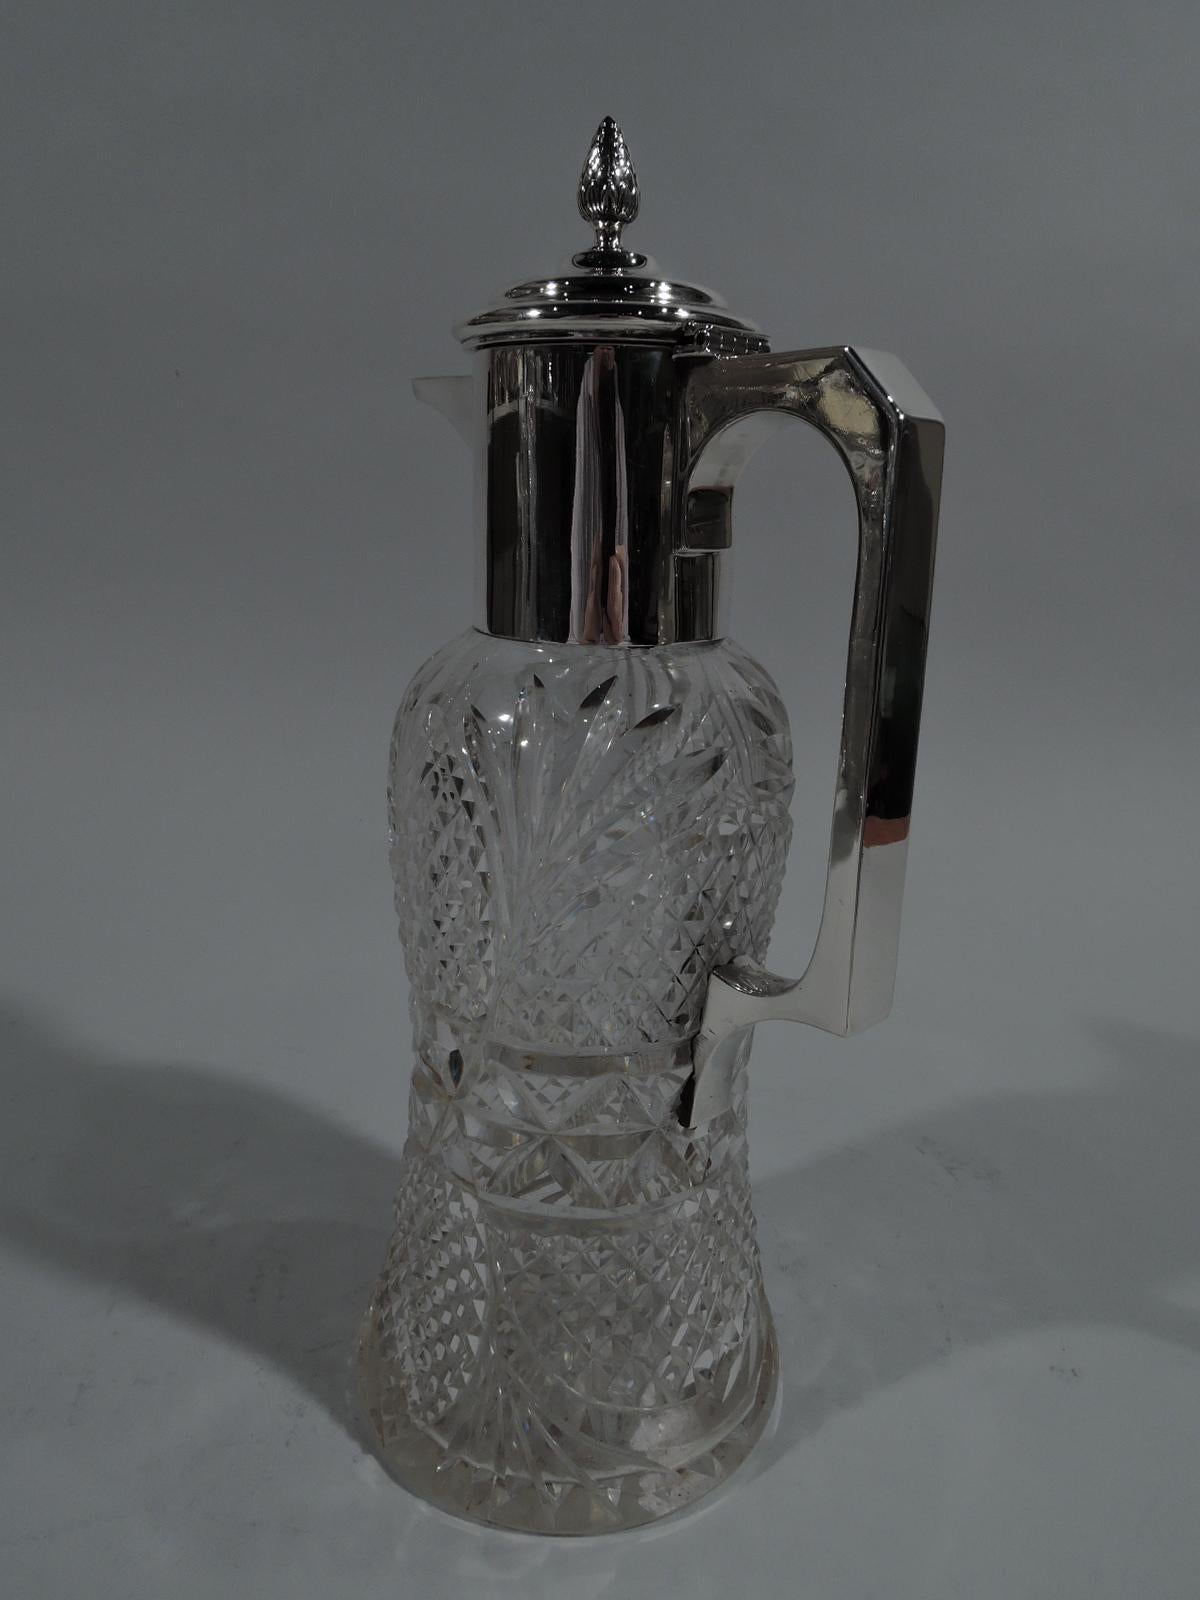 Edwardian cut-glass and sterling silver decanter. Made in Birmingham in 1910. Waisted cylinder with all-over ferns, facets, and stars. Sterling silver bracket handle, neck collar, and stepped and hinged cover with bud finial and spout. Fully marked